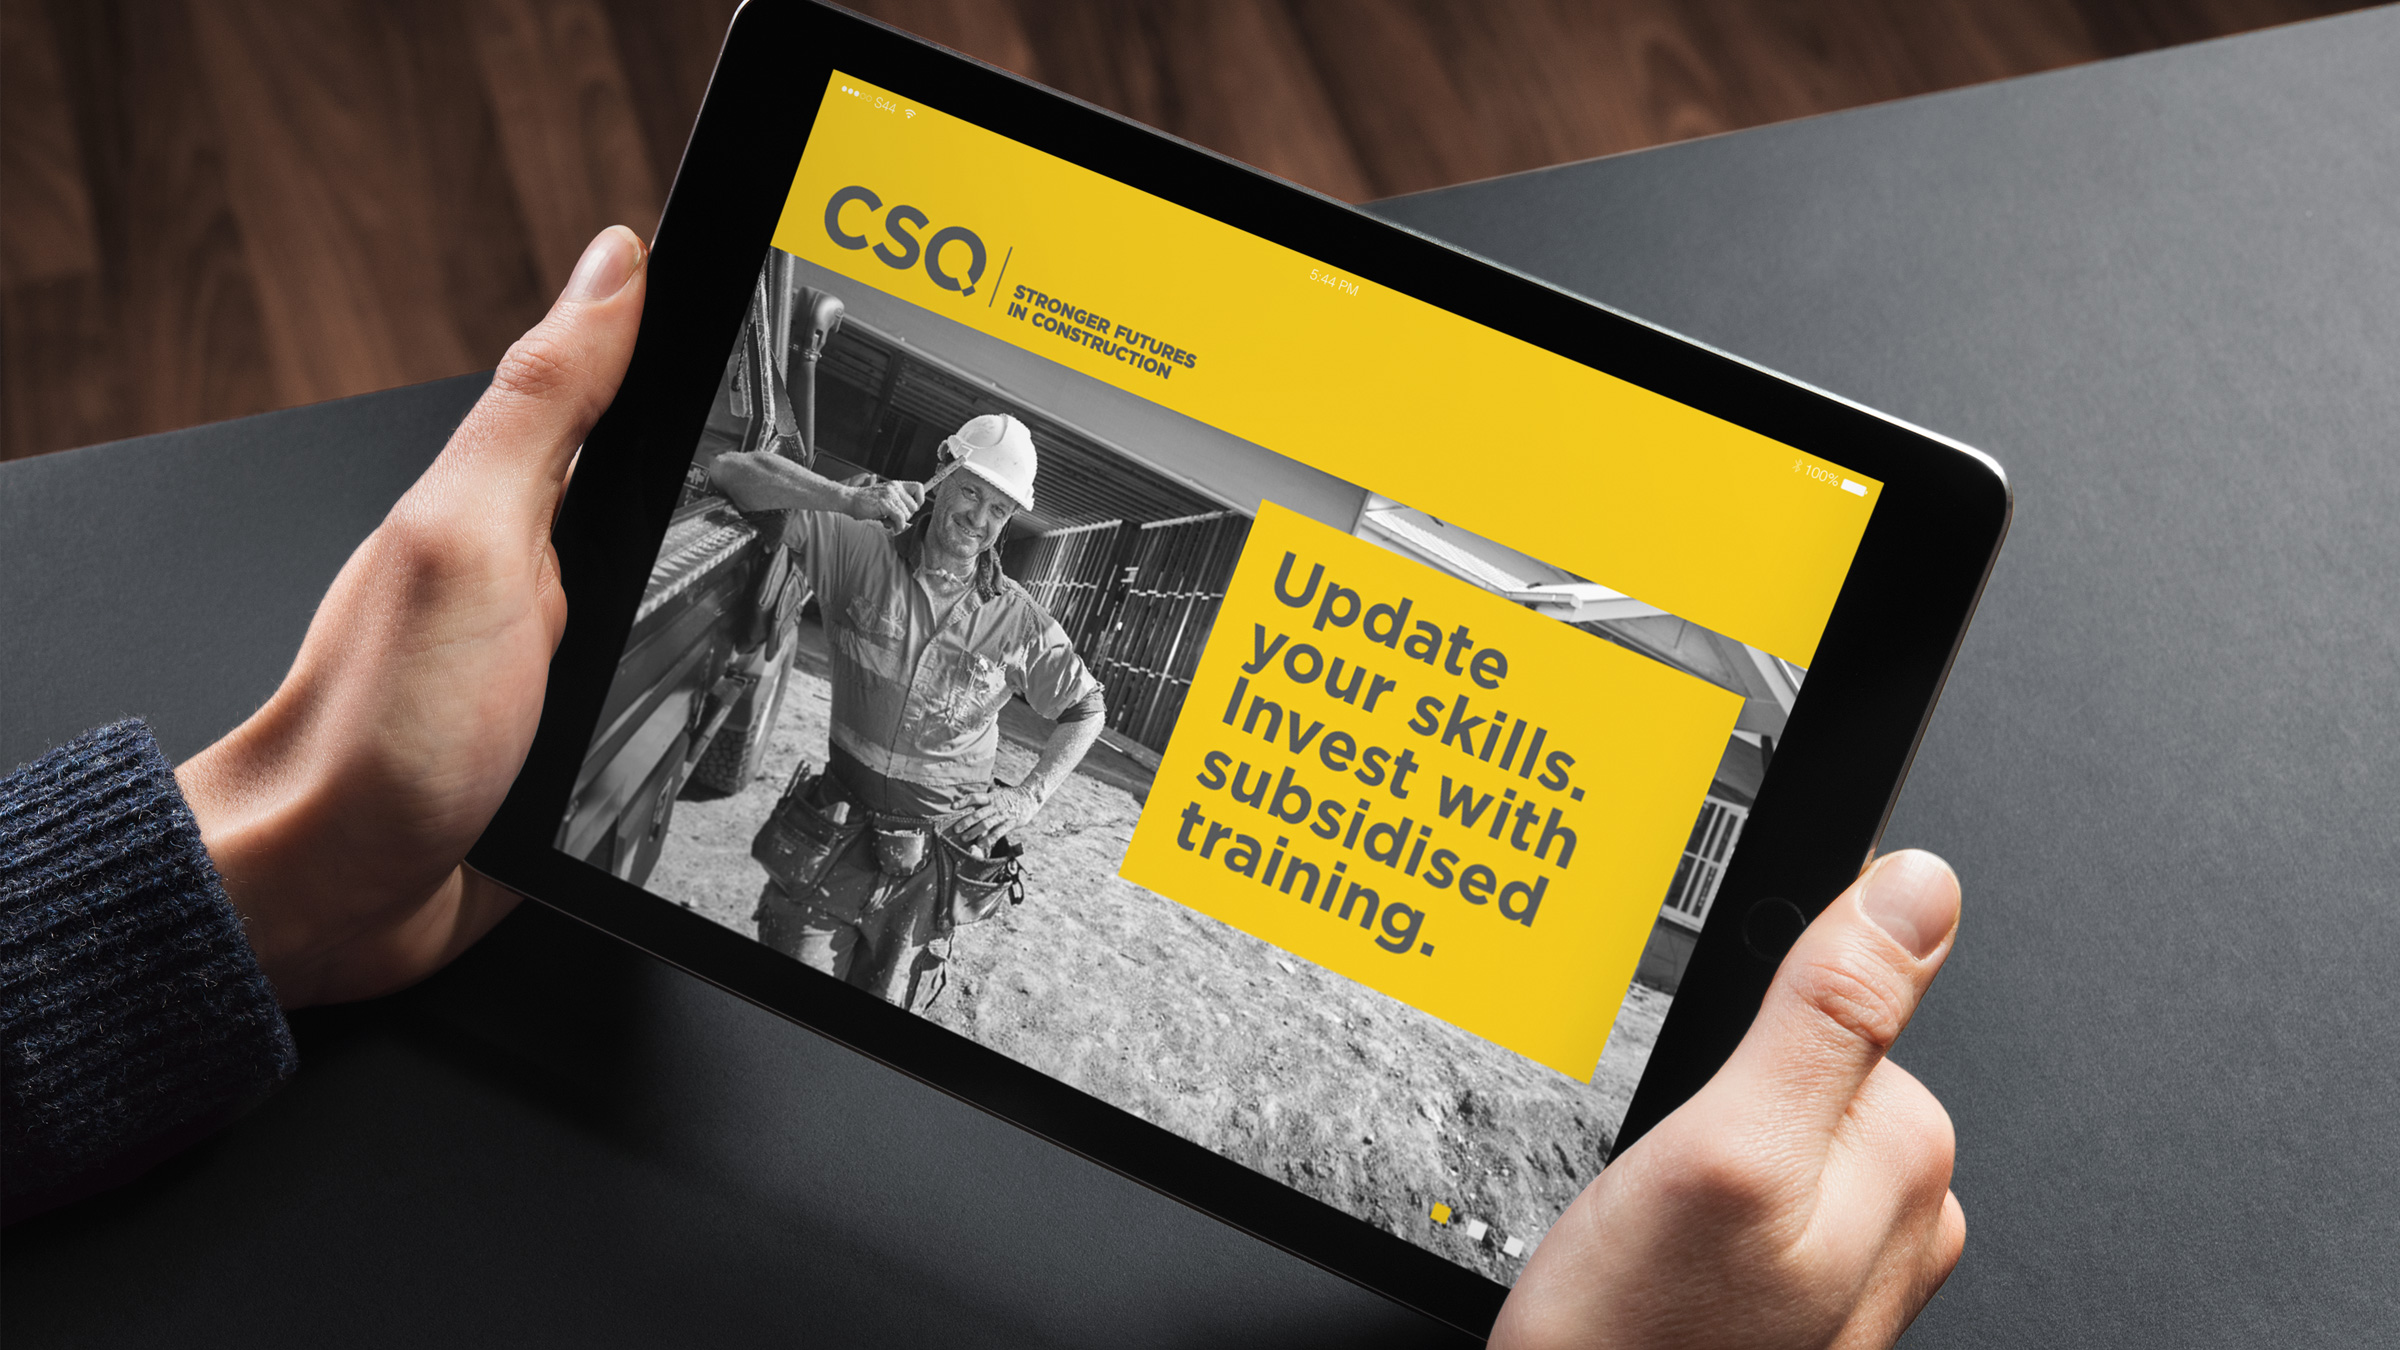 A landing page on a tablet part of the CSQ advertising campaign. It features a tradie tapping his hard hat with a pencil. The copy reads "update your skills. Invest with subsidised training."